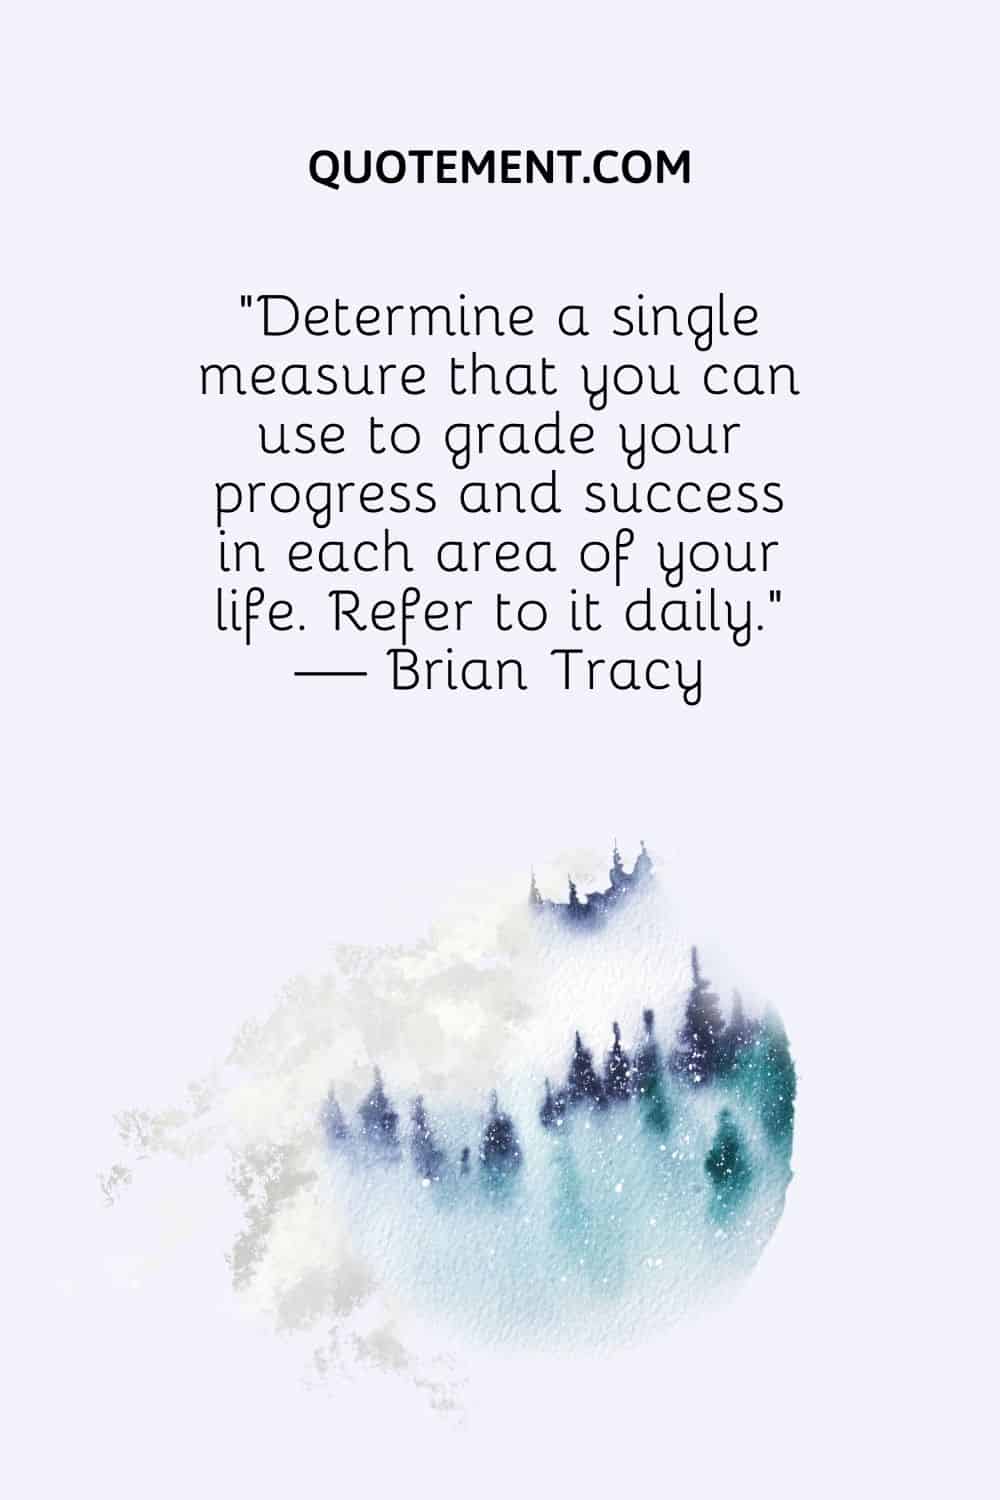 Determine a single measure that you can use to grade your progress and success in each area of your life